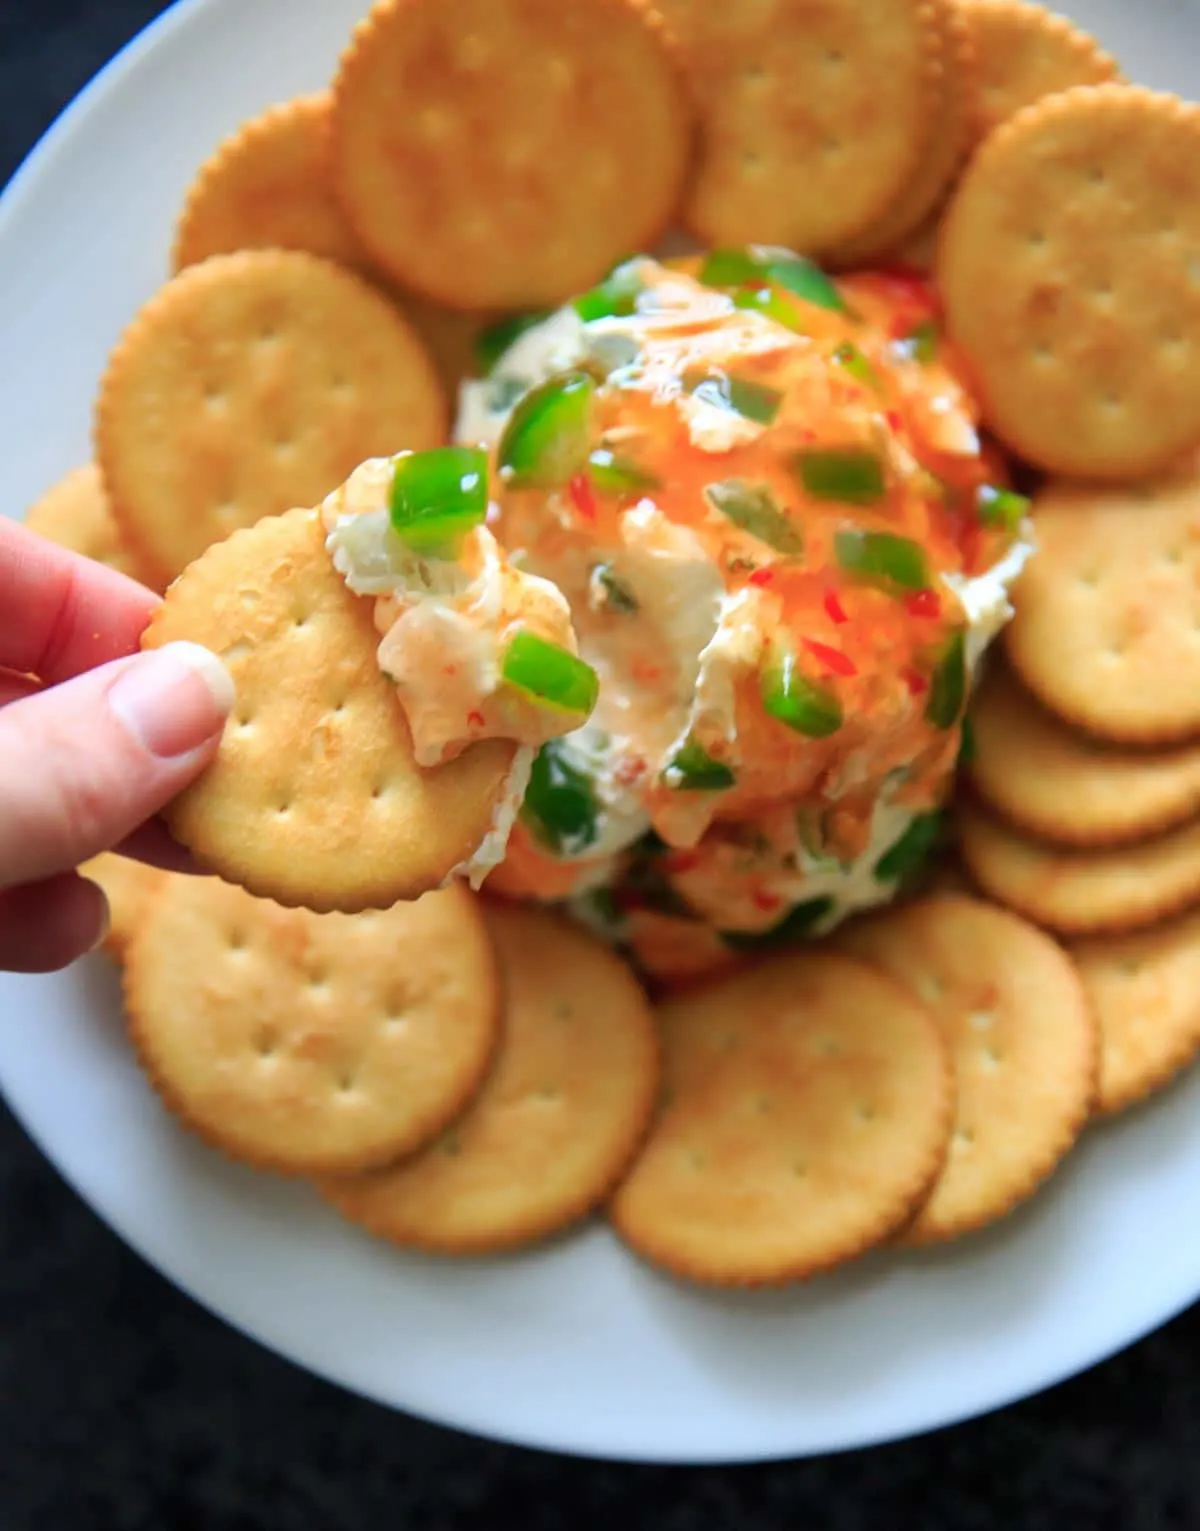 Sweet Chili Cream Cheese Dip - a super easy, 4 ingredient cheese ball appetizer that is perfect for a party snack or sharable dip. Sweet and spicy and delicious!